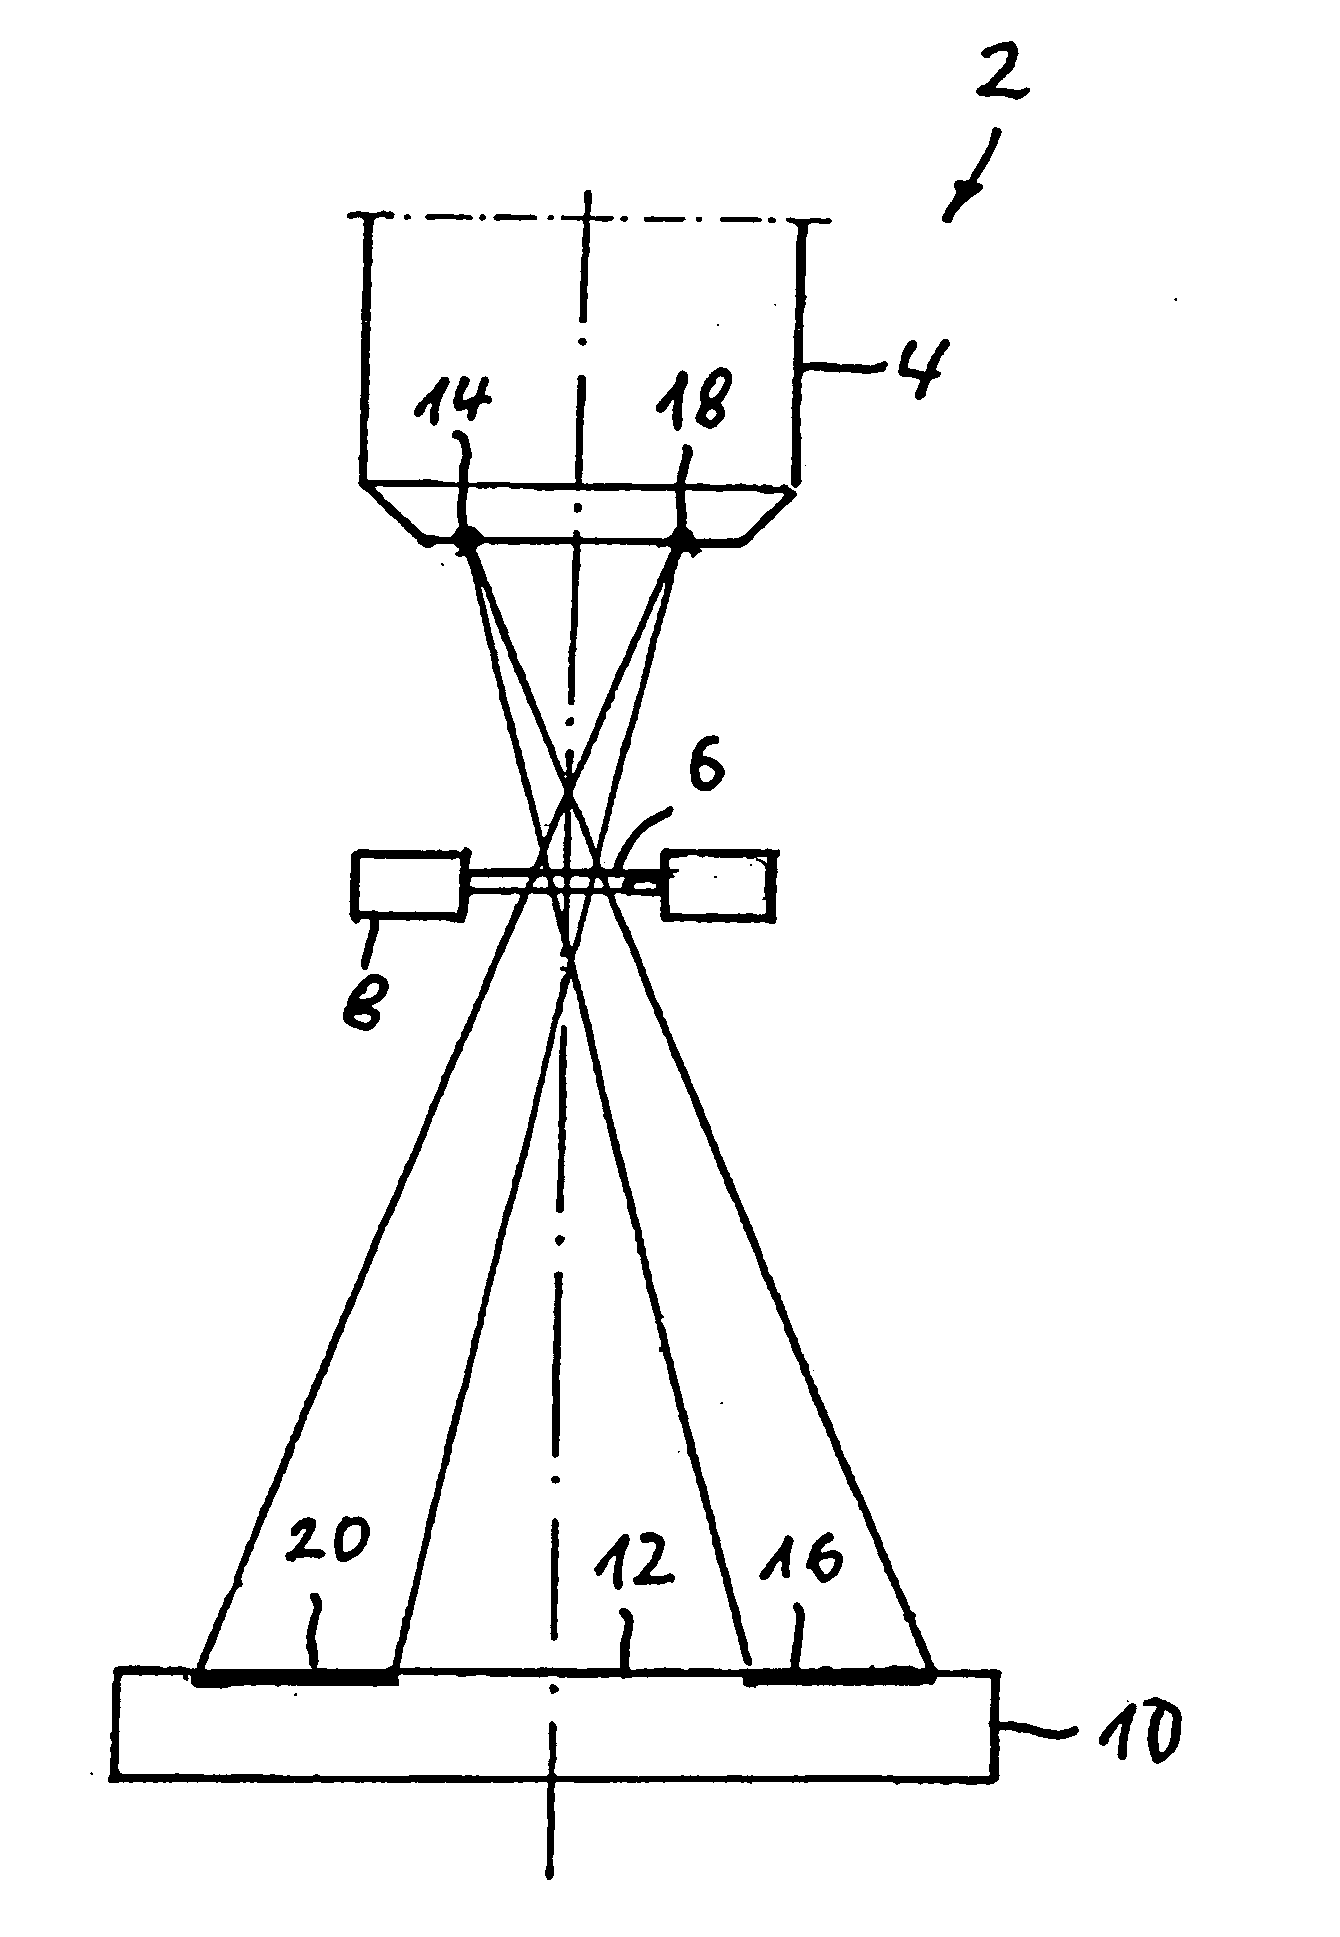 Apparatus for X-ray laminography and/or tomosynthesis